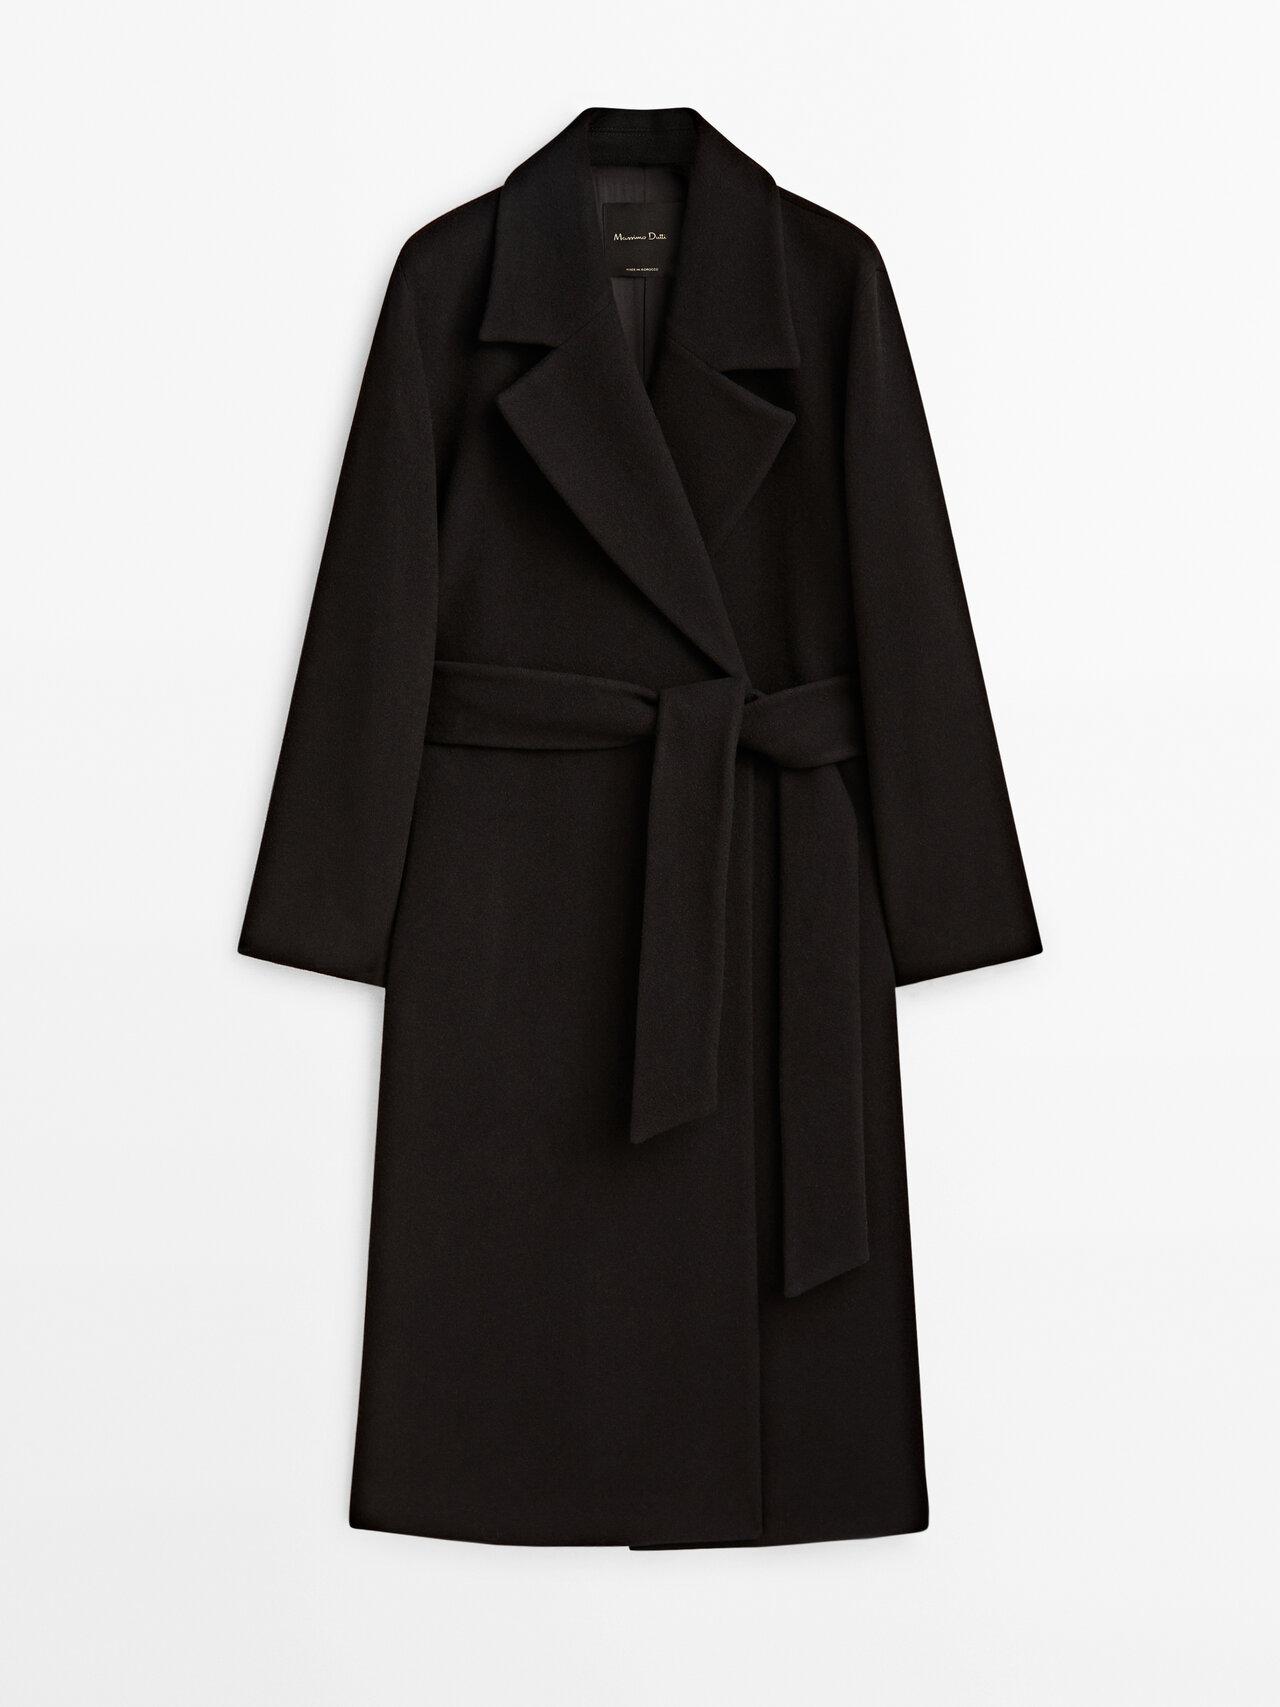 MASSIMO DUTTI Wool Blend Robe Coat With Belt in Black | Lyst